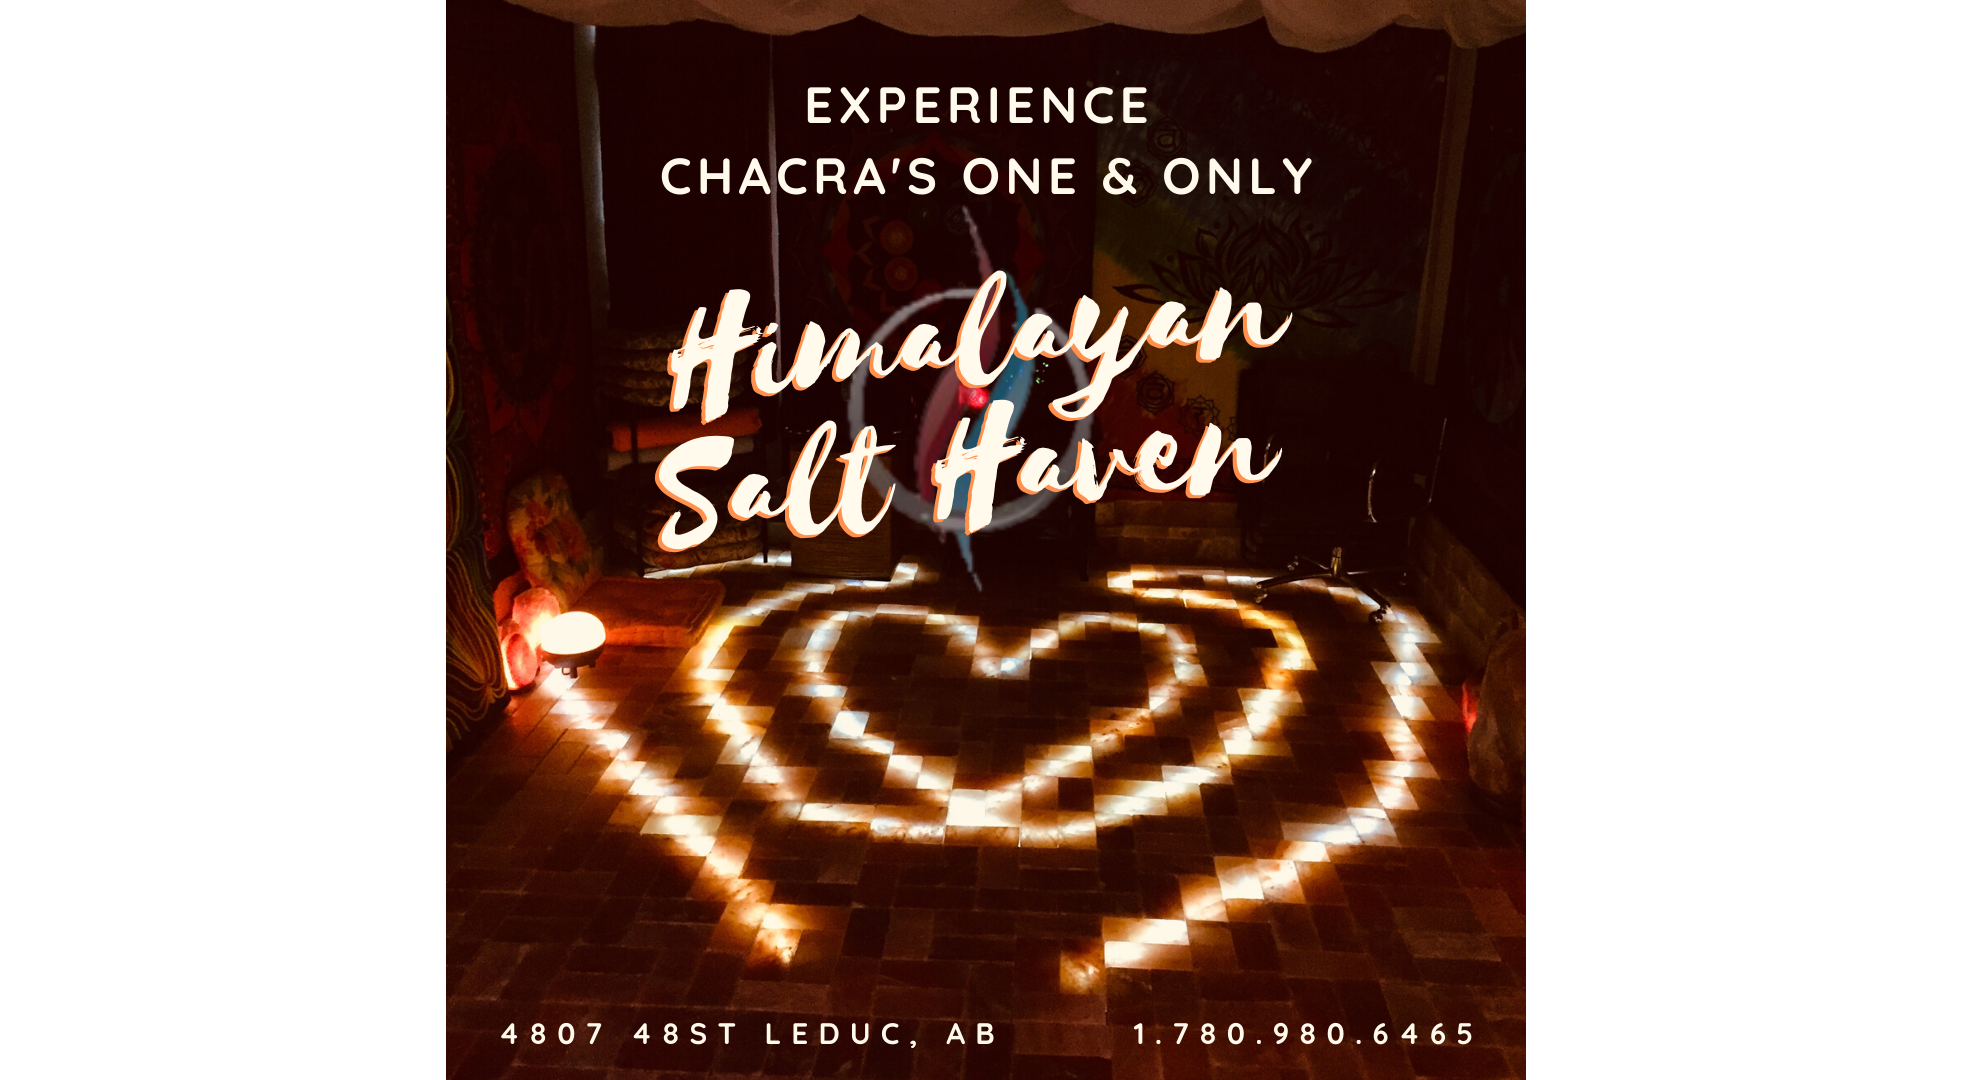 Complete Body, Mind, and Spirit Healing - Chacra Wellness